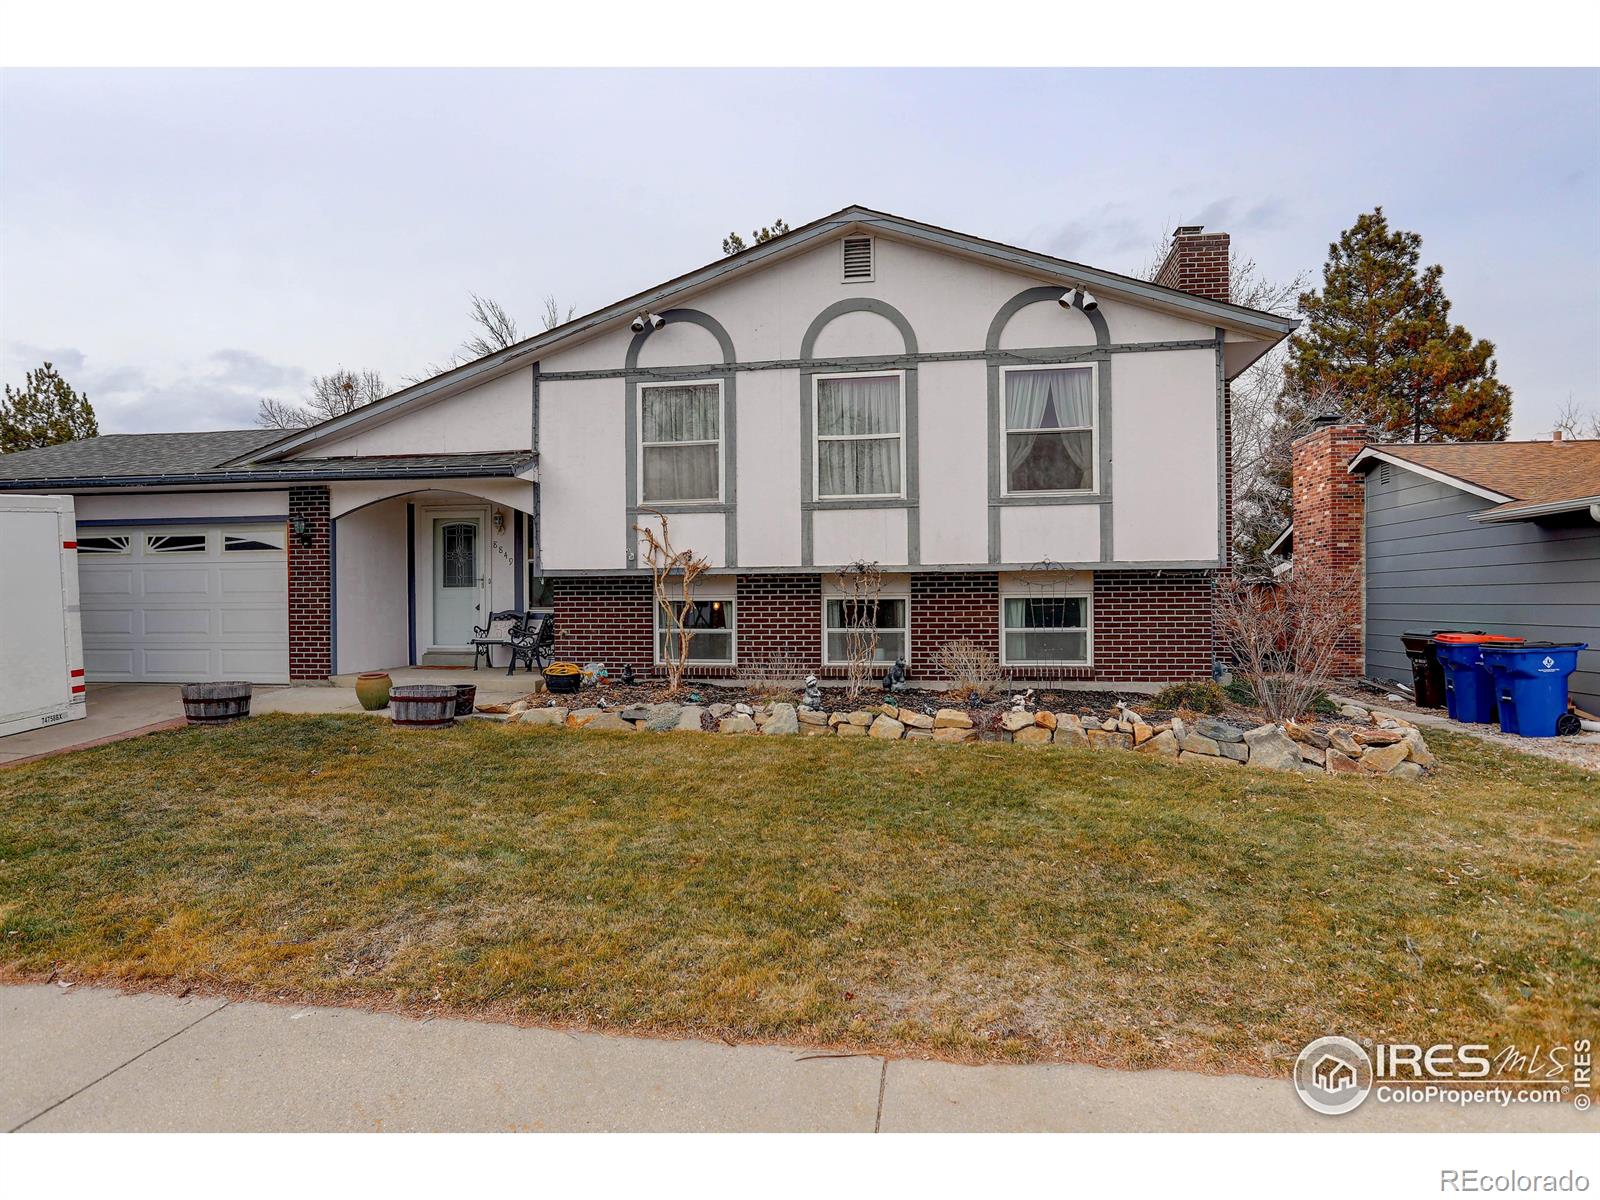 8849 W 75th Place, arvada MLS: 4567891001919 Beds: 3 Baths: 2 Price: $560,000